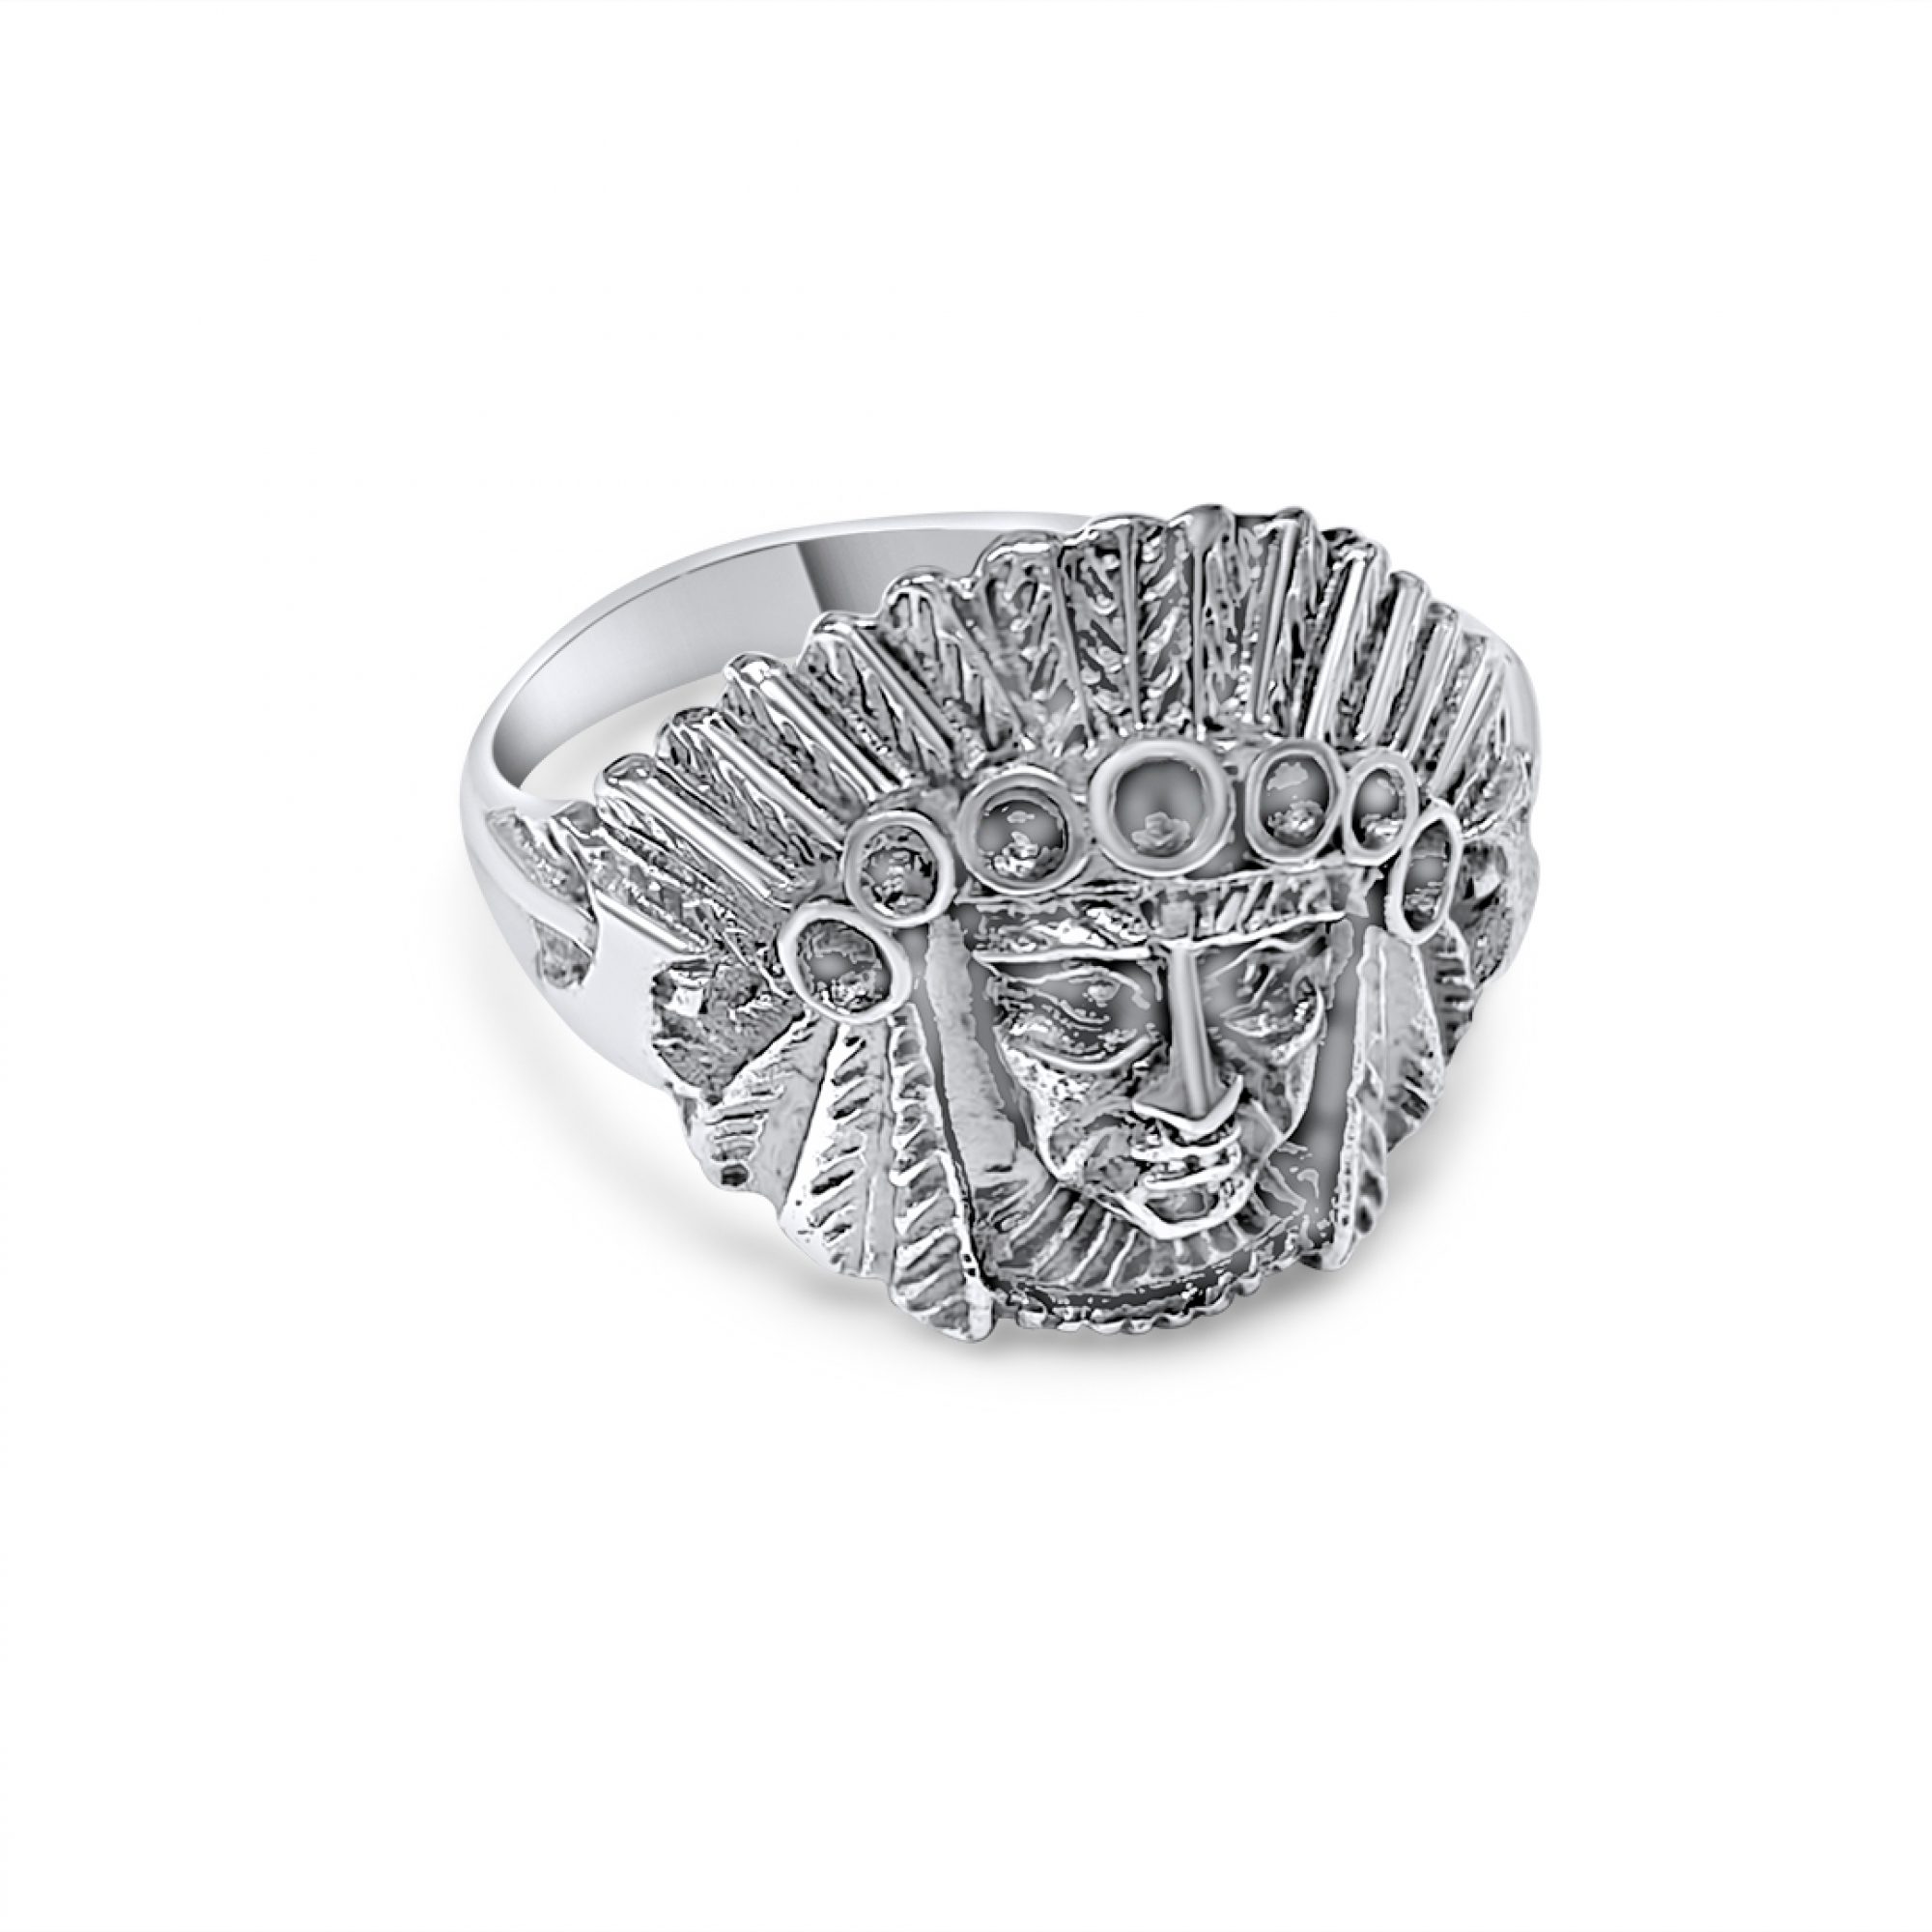 Silver Indian ring